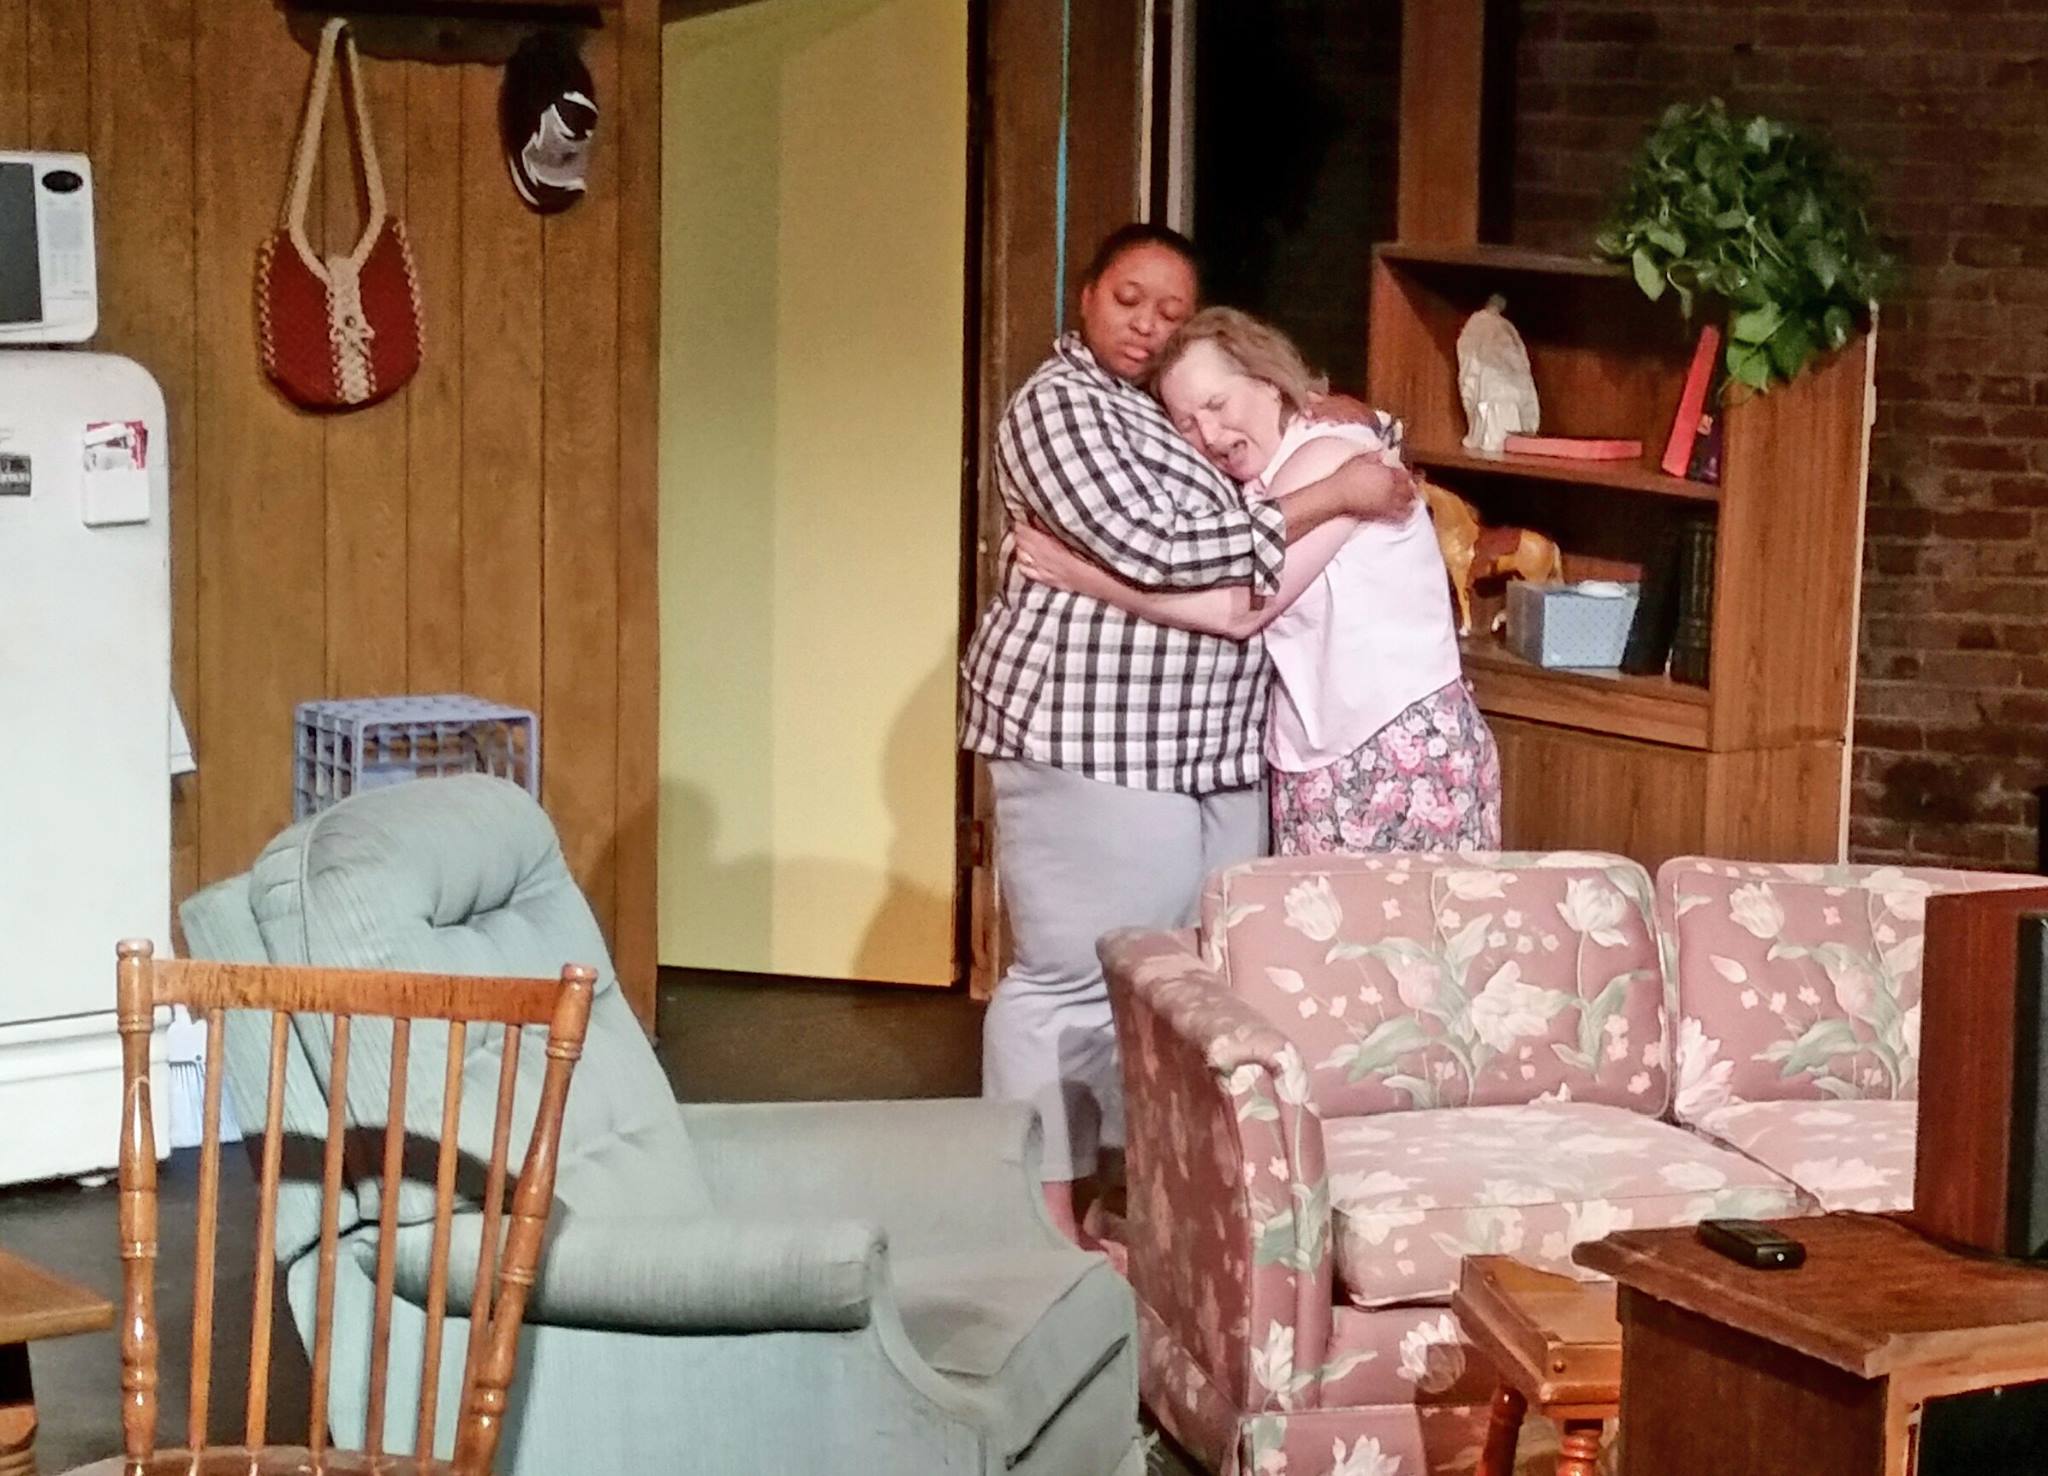 LaQuita James as LaSonia in the Nashville Premiere of The Trials & Tribulations of a Trailer Trash Housewife by Del Shores.